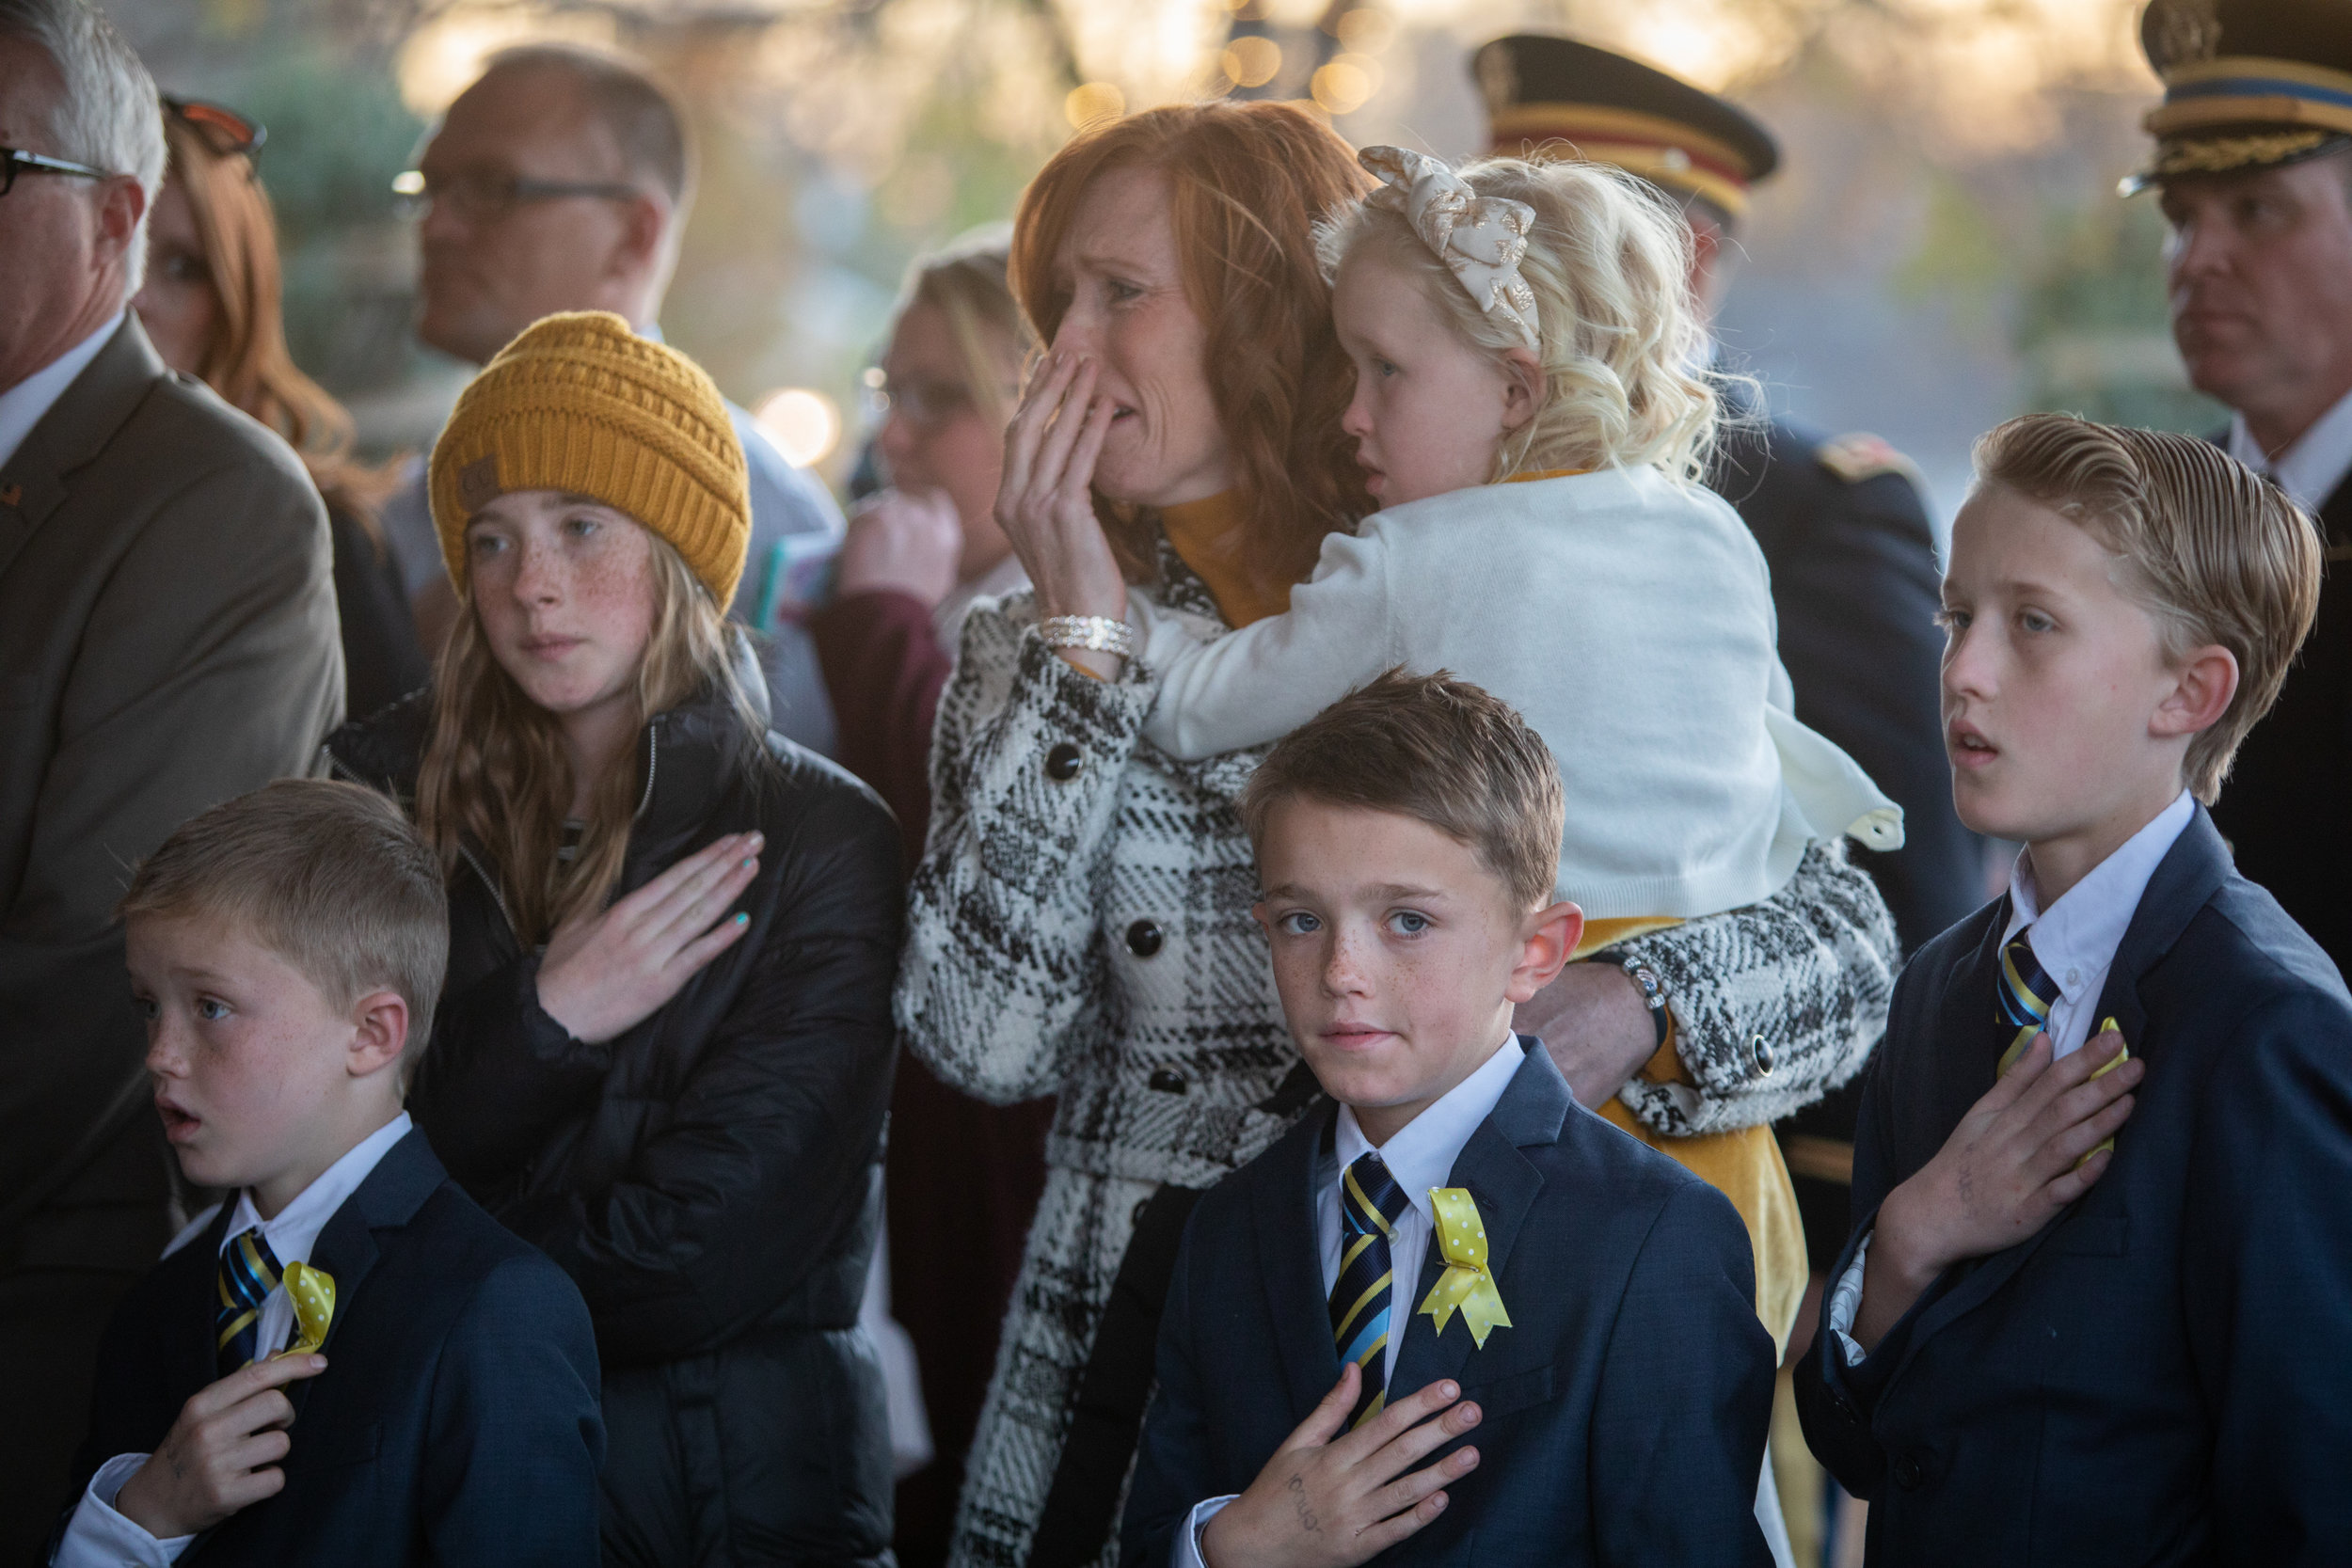  Jennie Taylor, wife of Maj. Brent R. Taylor, looks on with her children as a casket containing her husband’s remains is brought to Myers Mortuary in Ogden on Wednesday, Nov. 14, 2018. Taylor, 39, died Nov. 3, 2018, in Afghanistan of wounds sustained